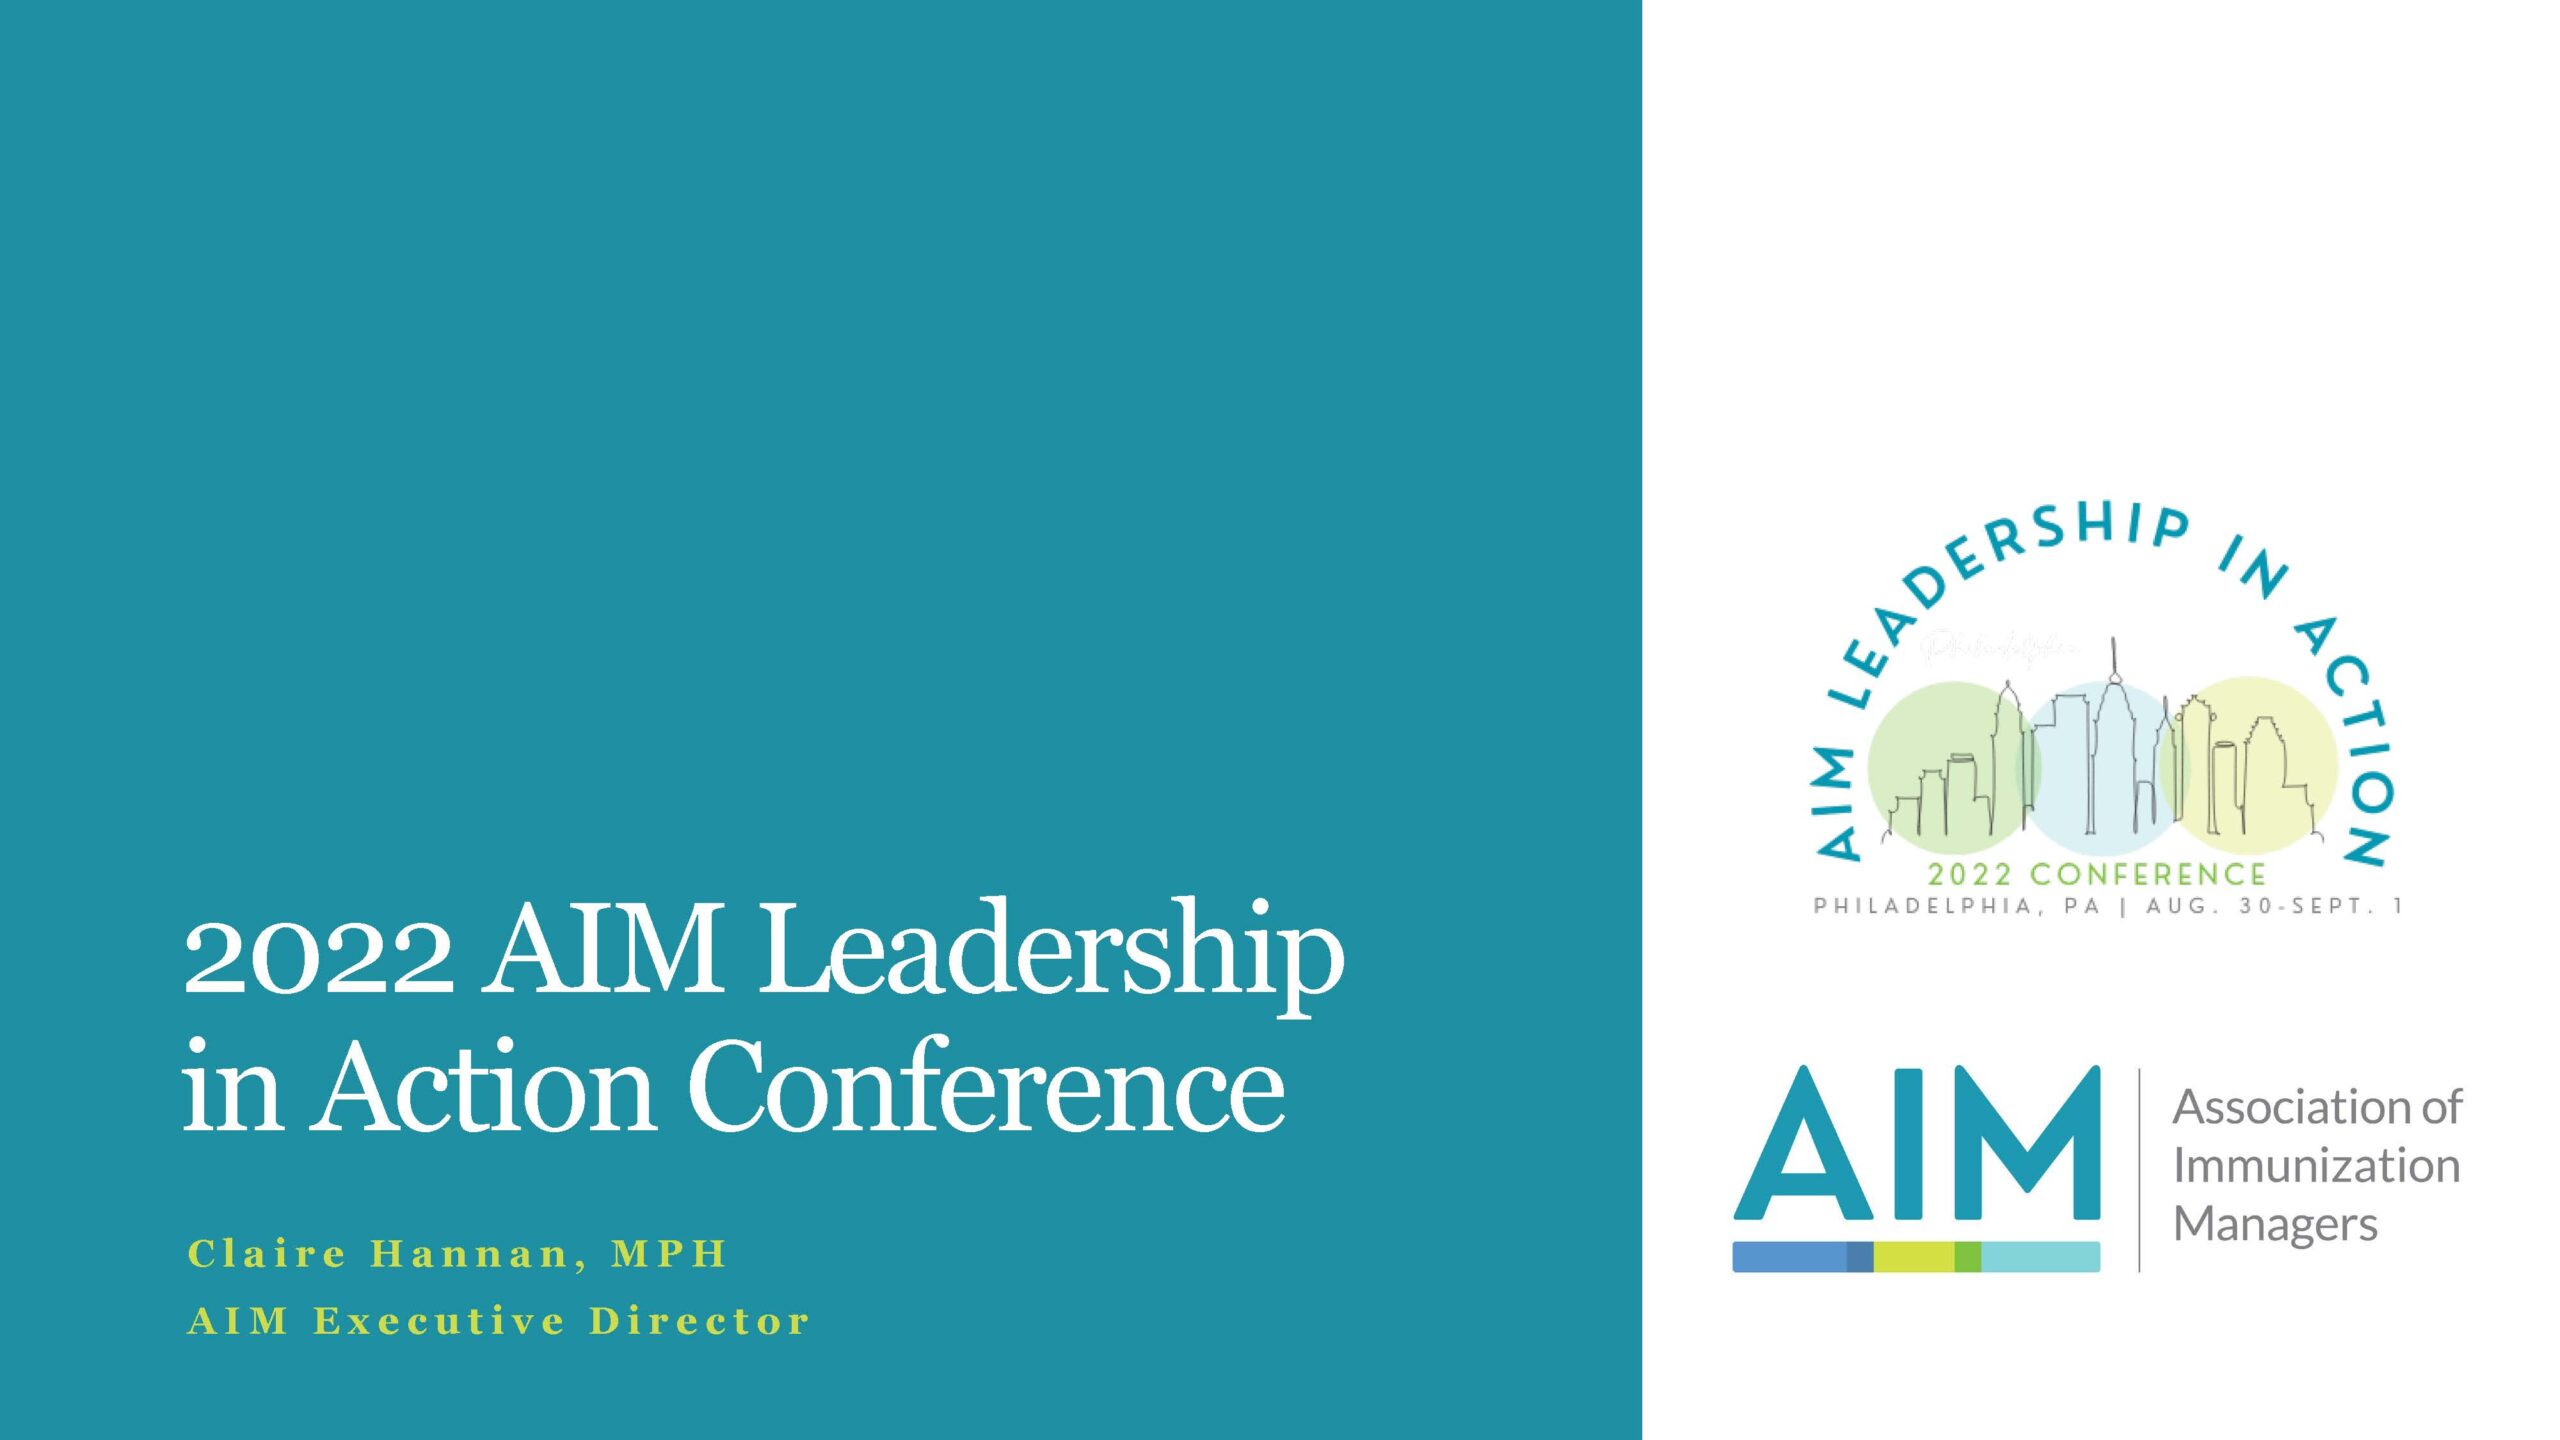 2022 AIM Leadership in Action Conference Association of Immunization